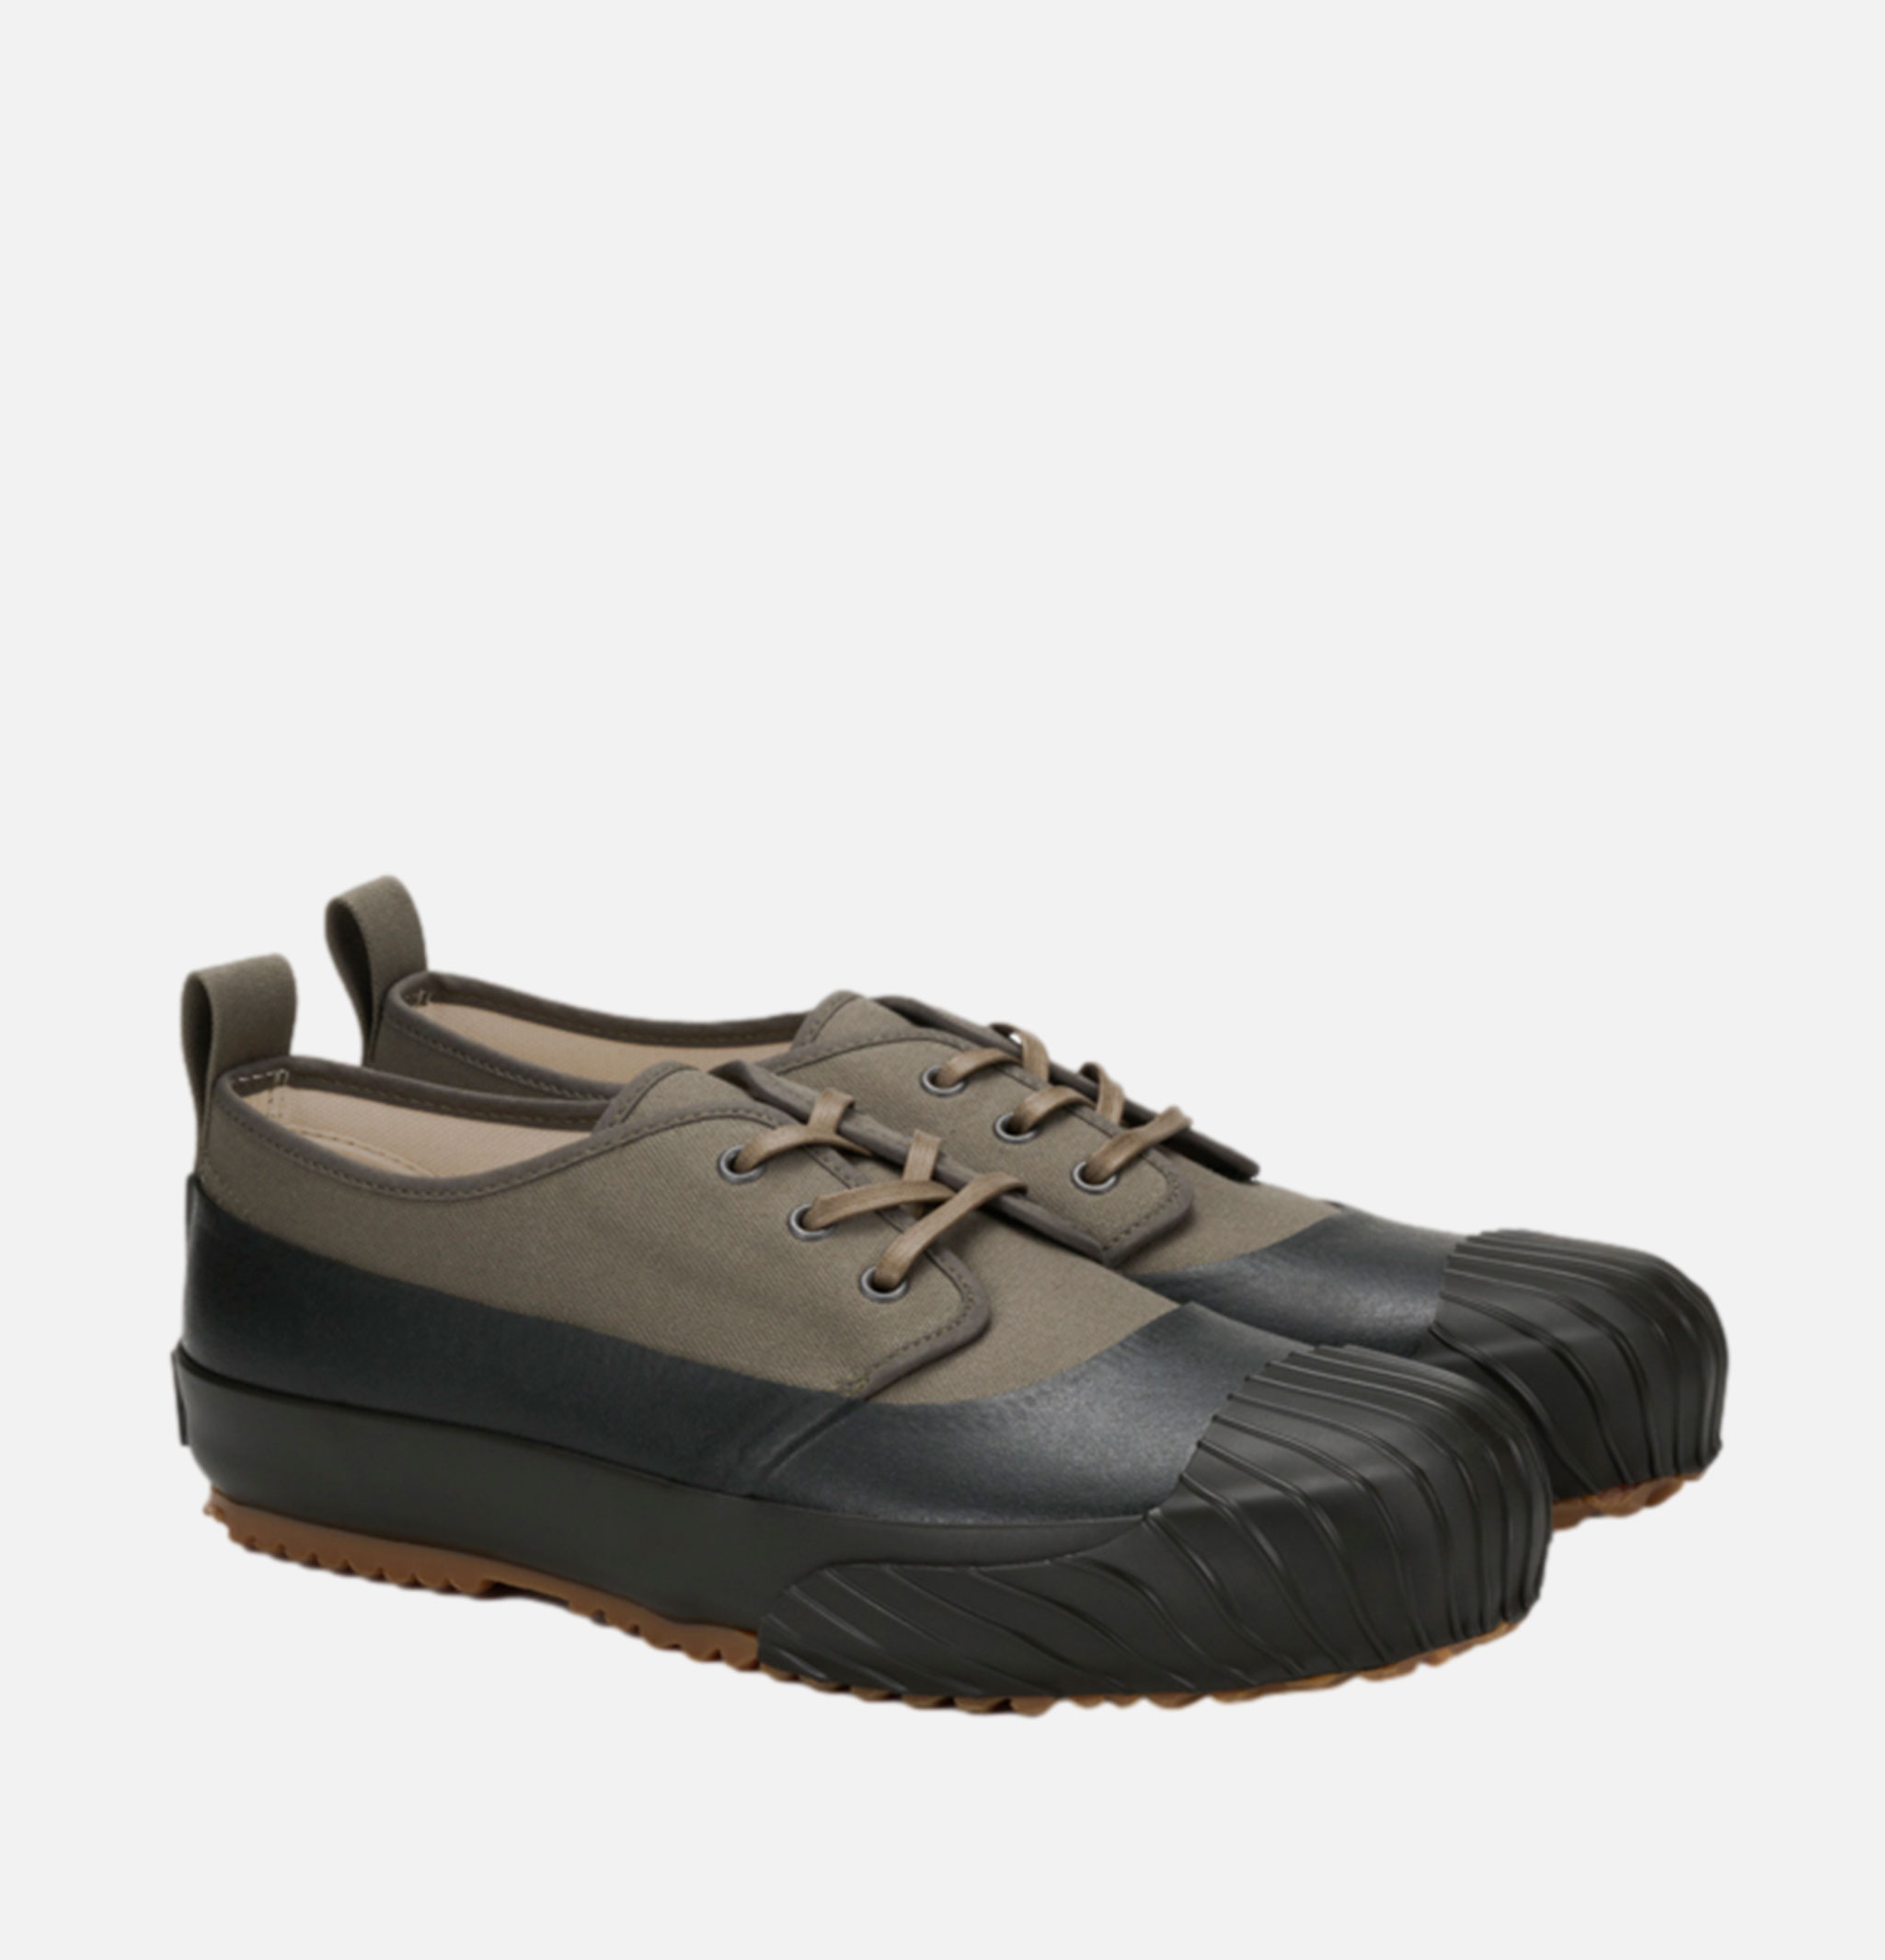 Moonstar Alweather Low Olive Shoes